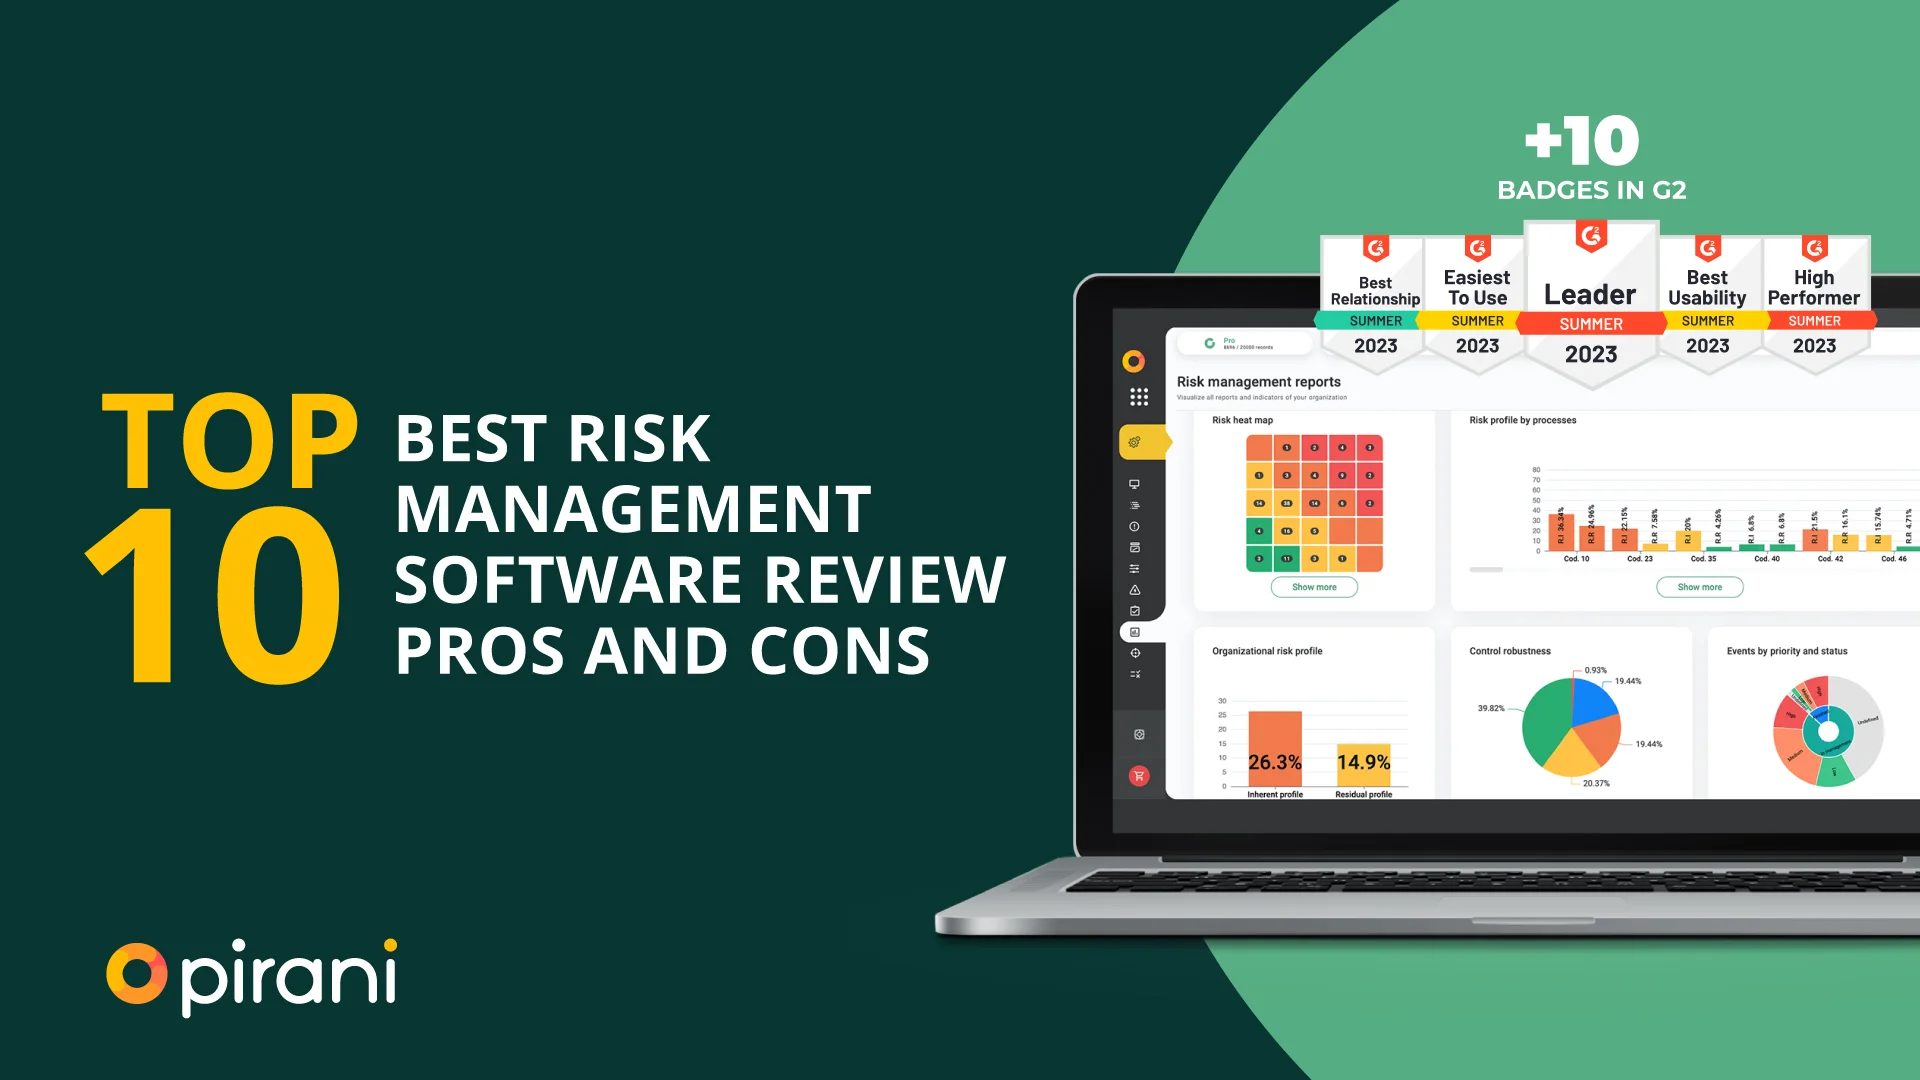 Top 10 Best Risk Management Software: Review,Pros, And Cons